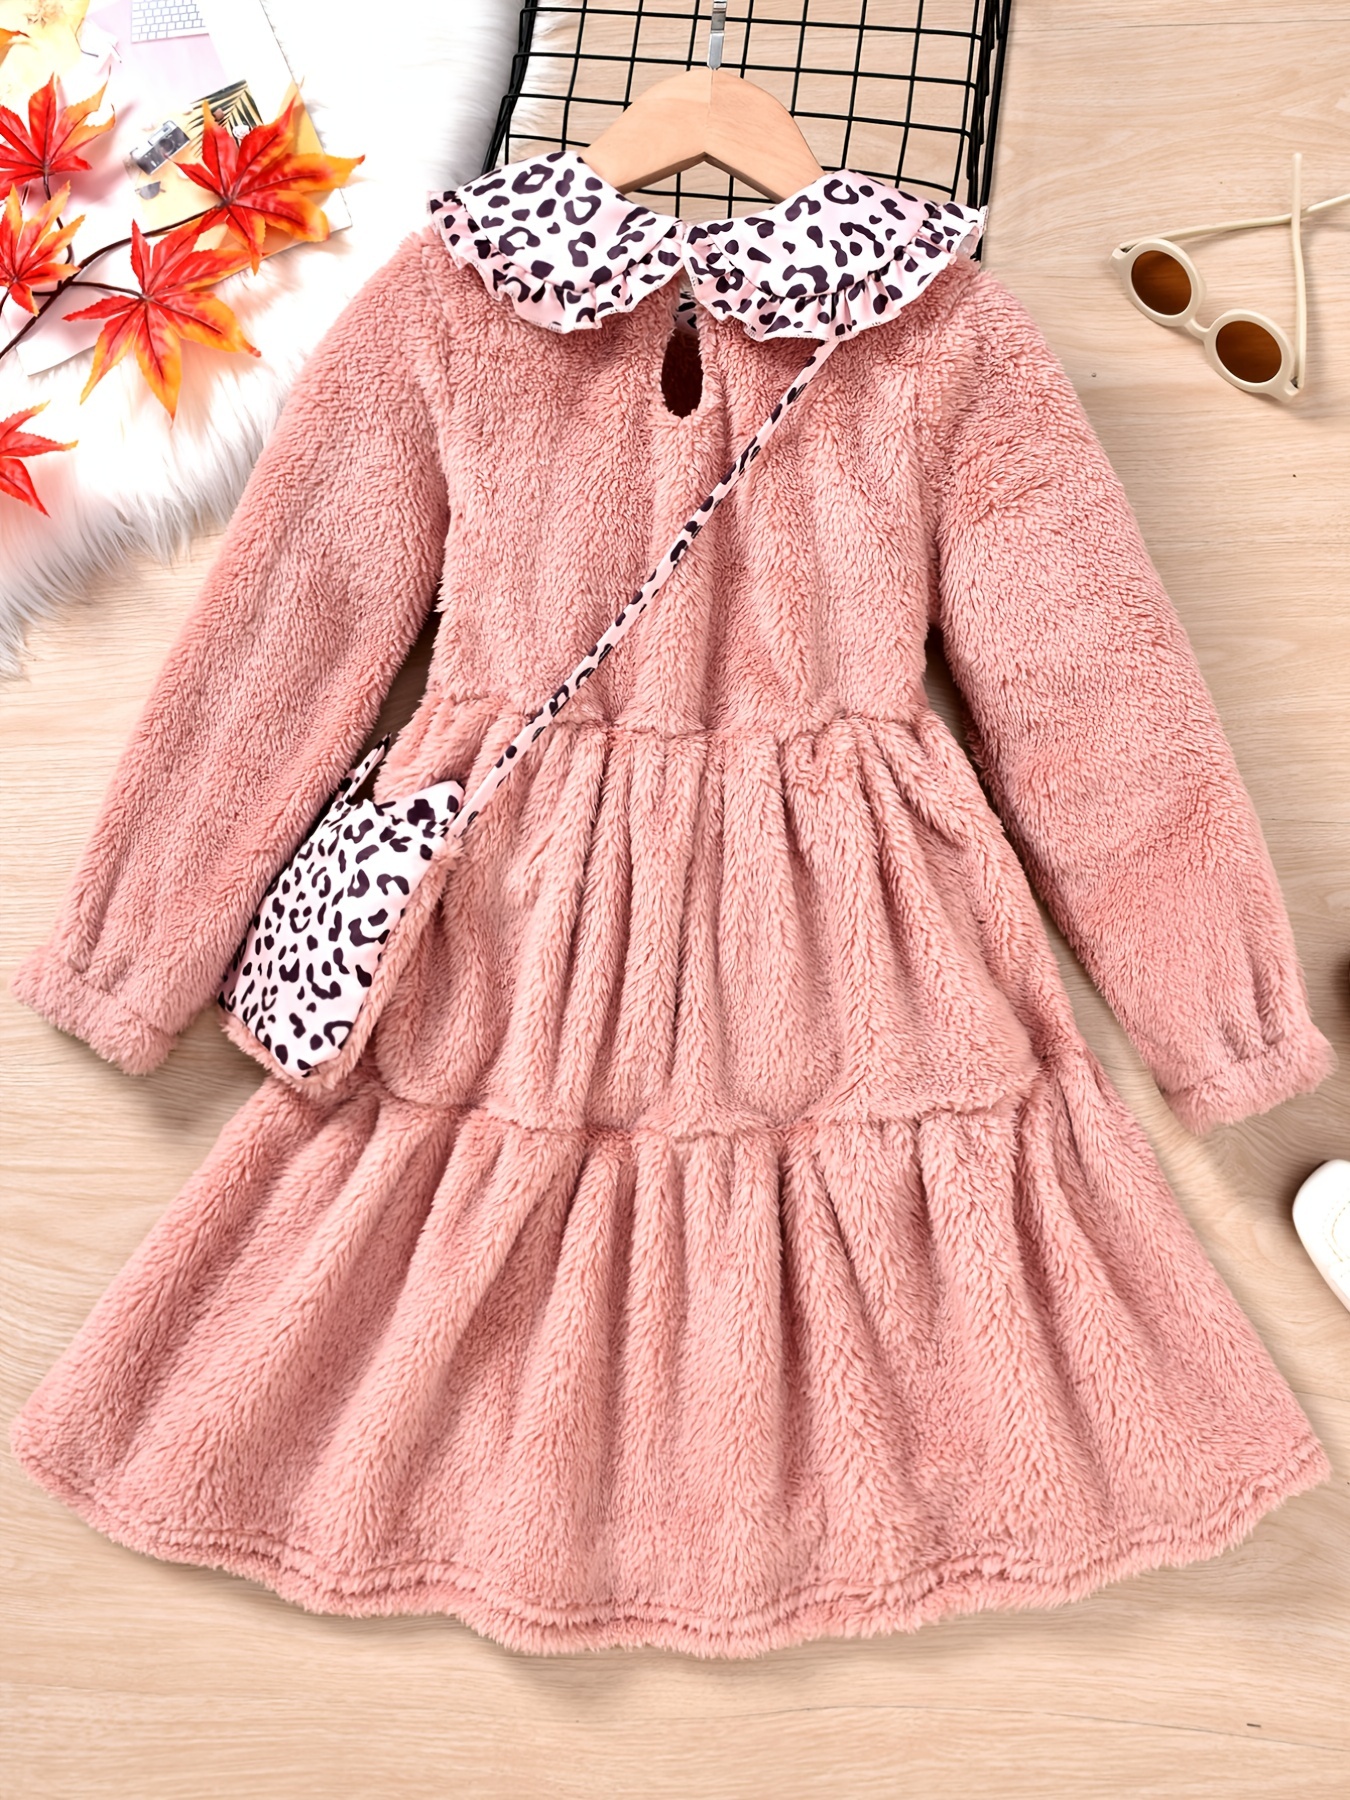 2pcs Girls Elegant Cute Fleece Thermal Dress With Ruffled Neck & Leopard  Print Bag For Winter Party, Lotus *